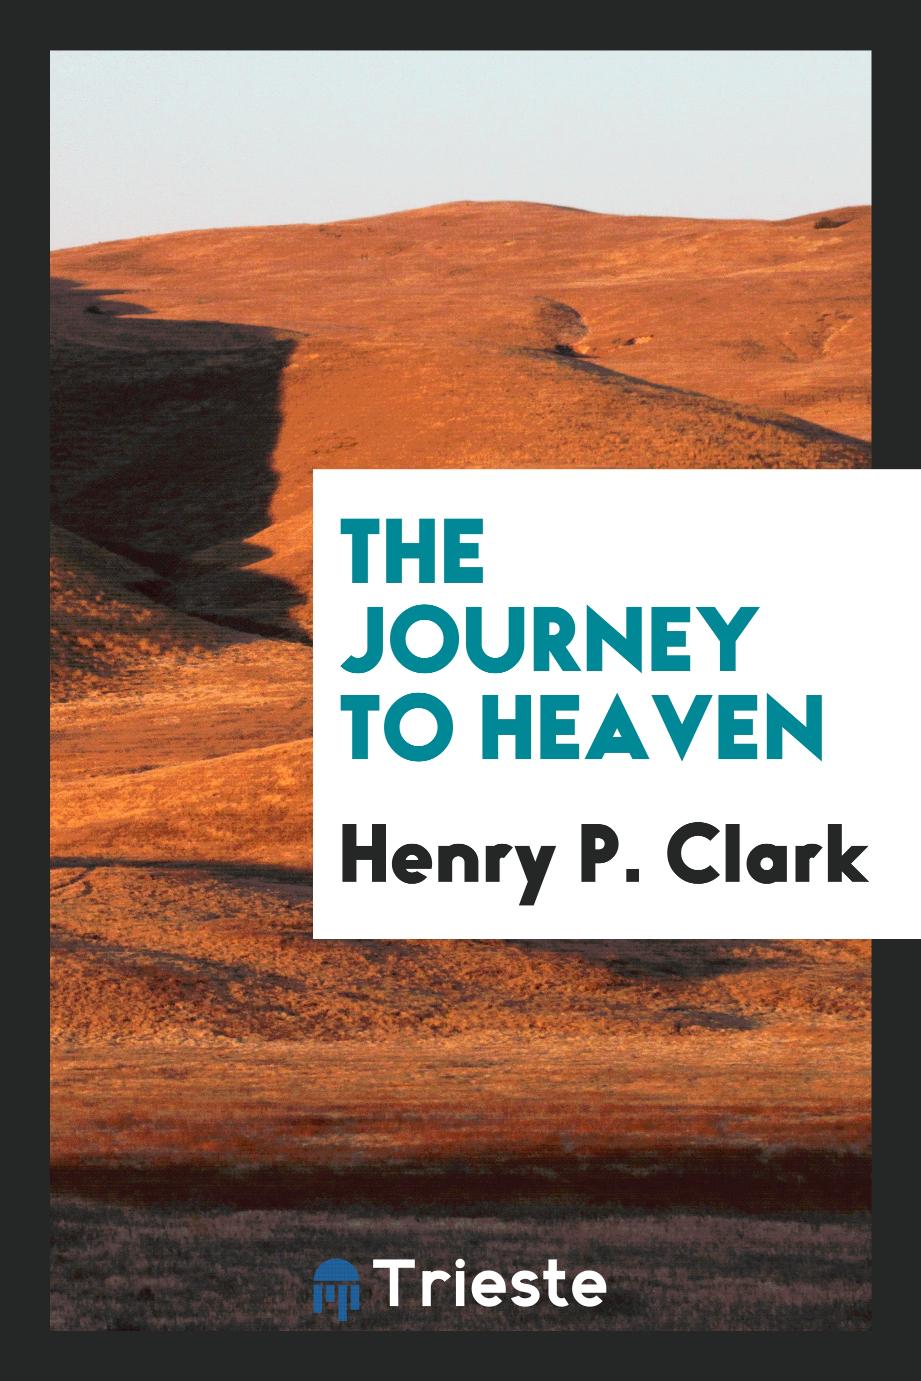 The journey to heaven